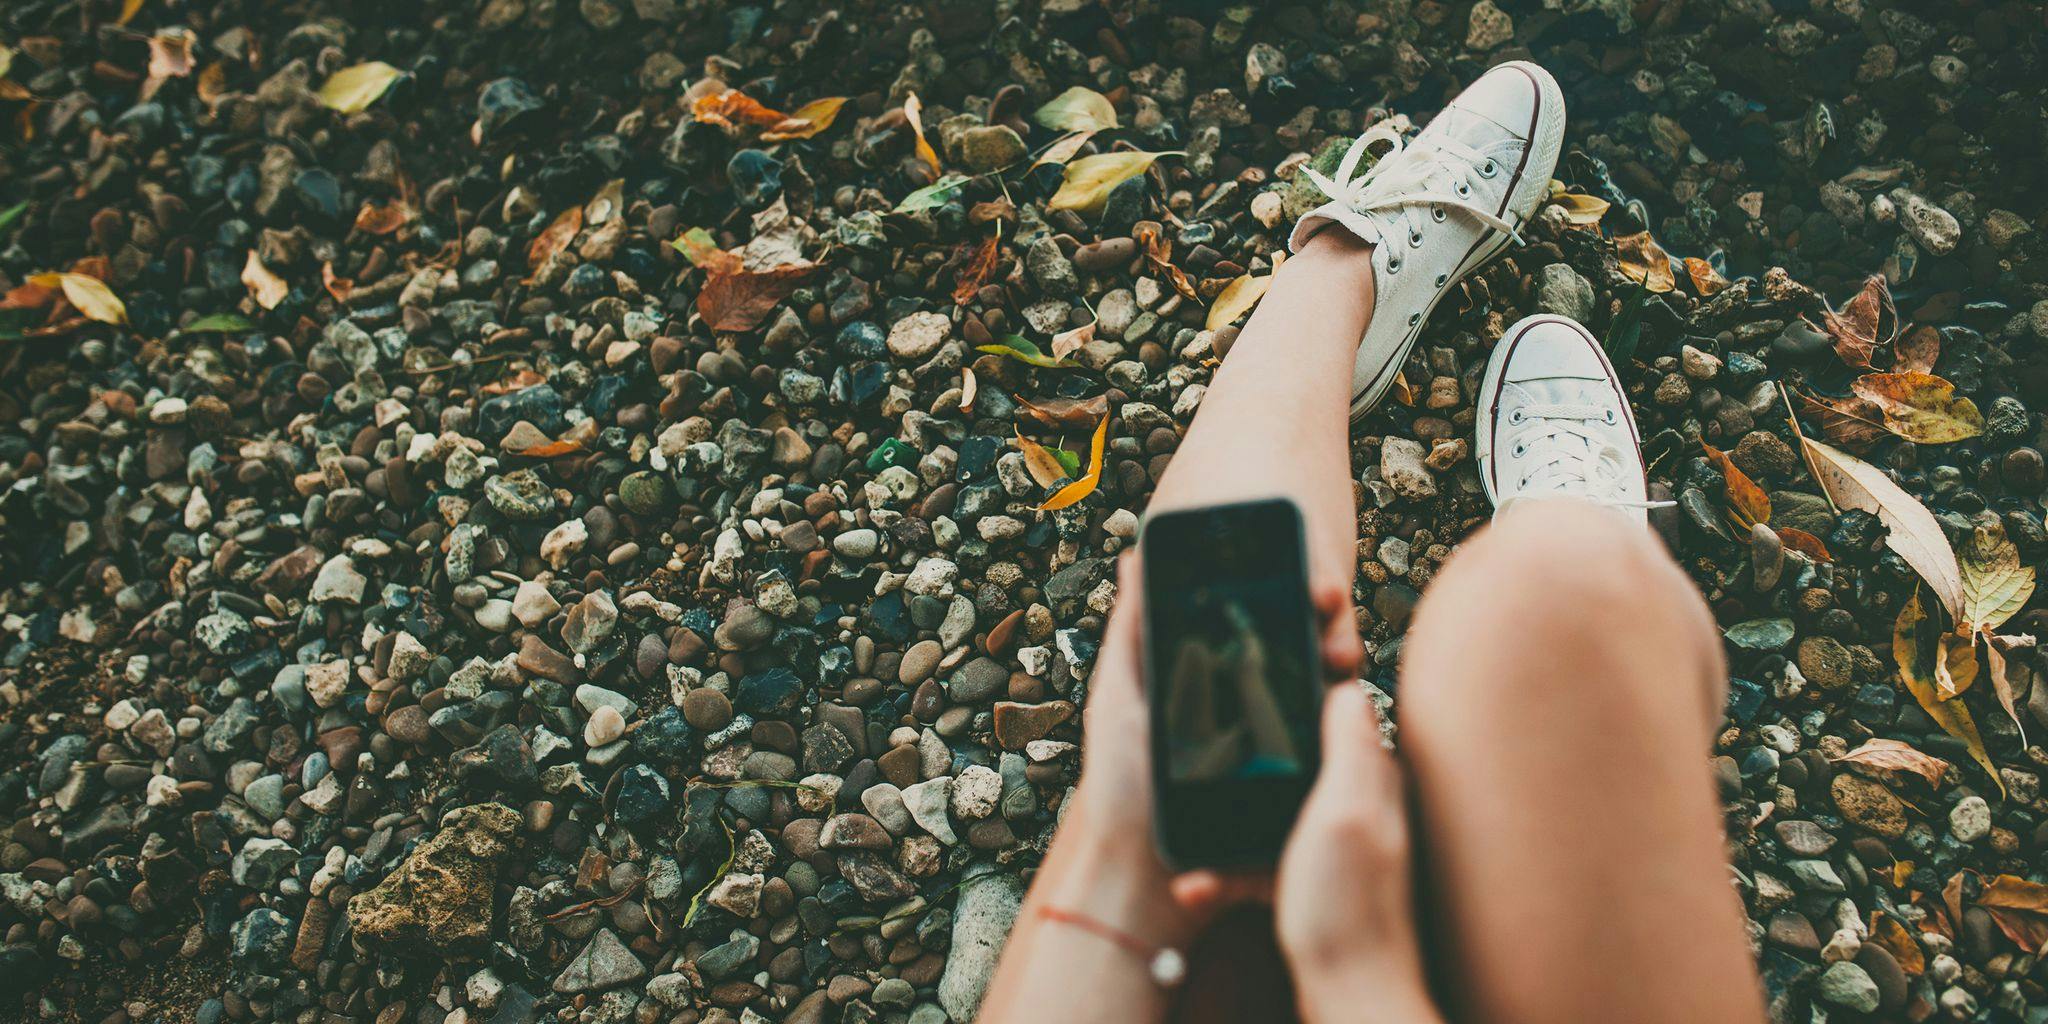 Your Instagram photos can reveal whether you have depression